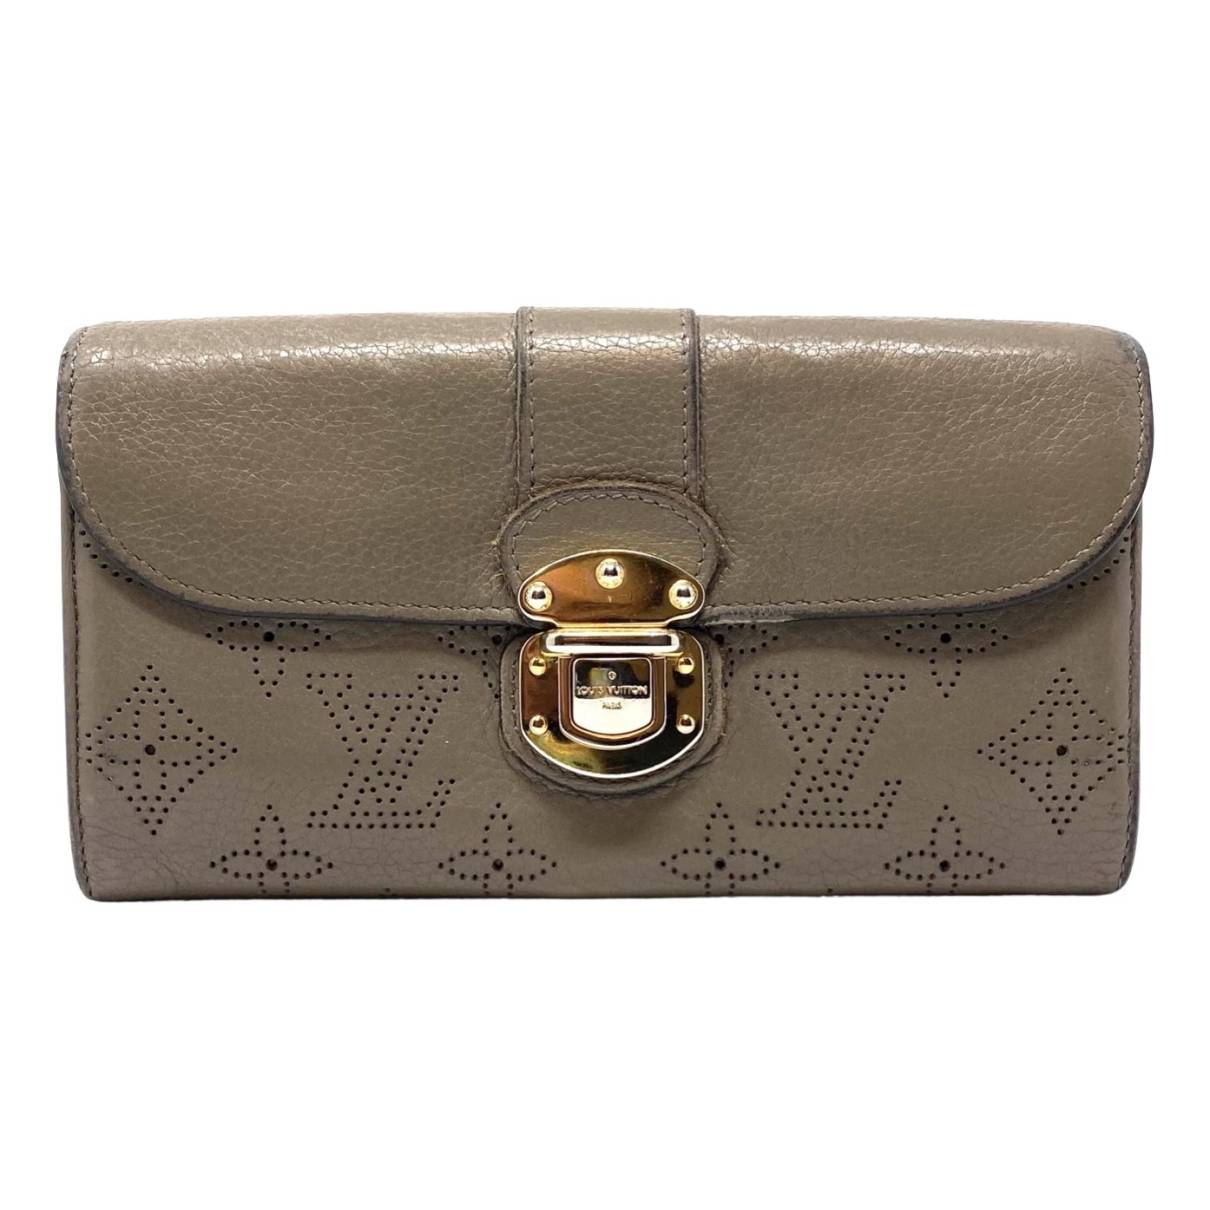 Louis Vuitton - Authenticated Mahina Wallet - Leather Grey for Women, Good Condition